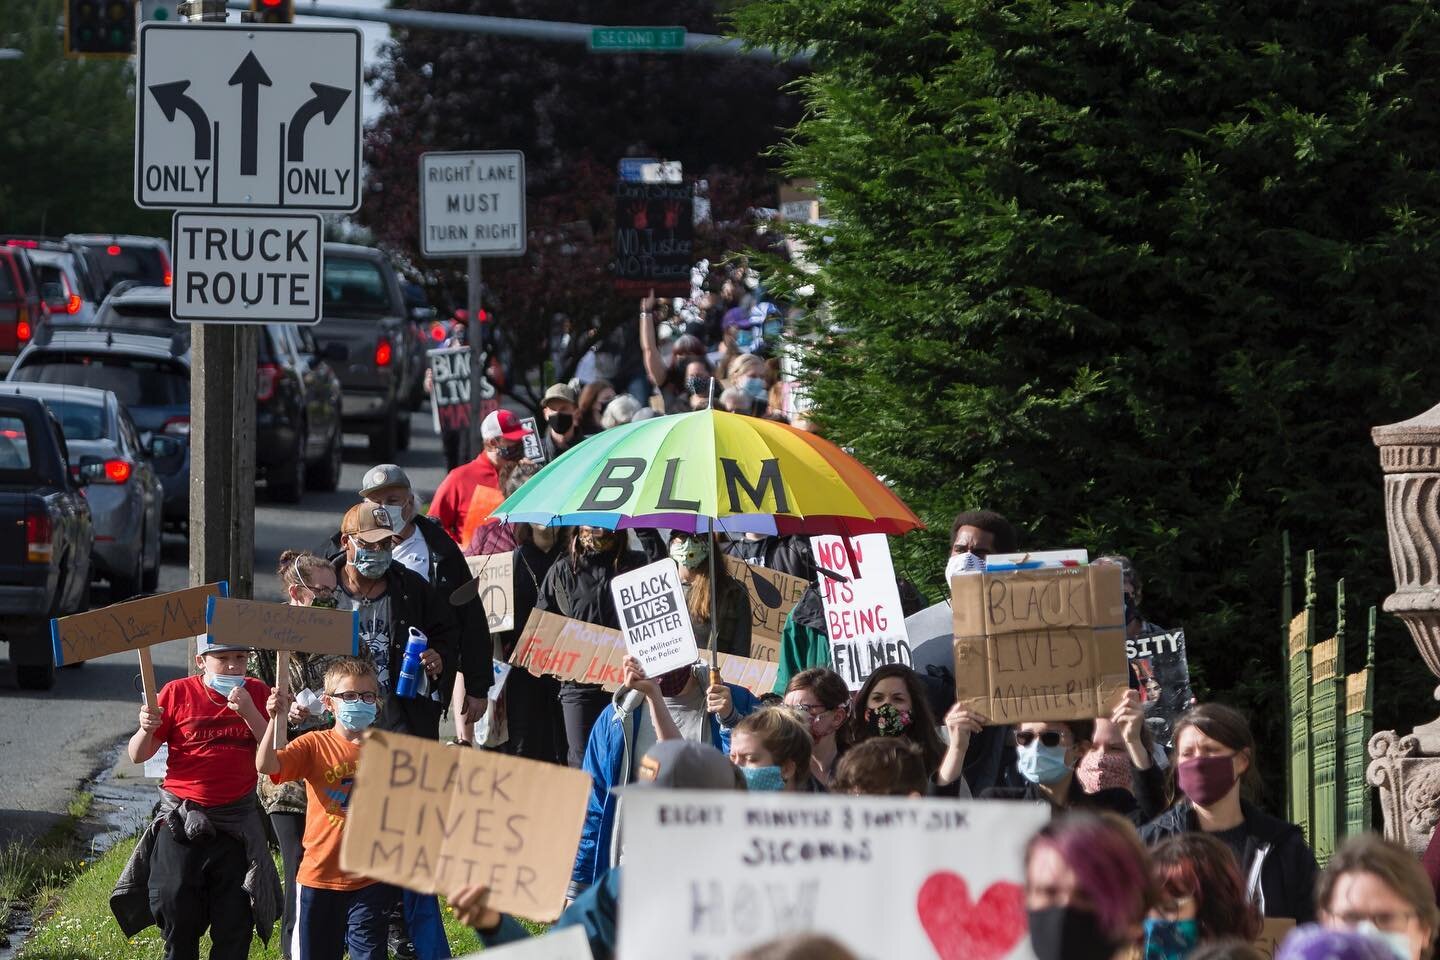 Smaller rural towns nationwide are taking a stance against racism. An estimated 60,000 turn out in Seattle June 12th. While an estimated 900 march through Snohomish WA in support of #blacklivesmatter.
|
|
#everettwa #snohomishwa #mukilteo .
.
.
.
.
.